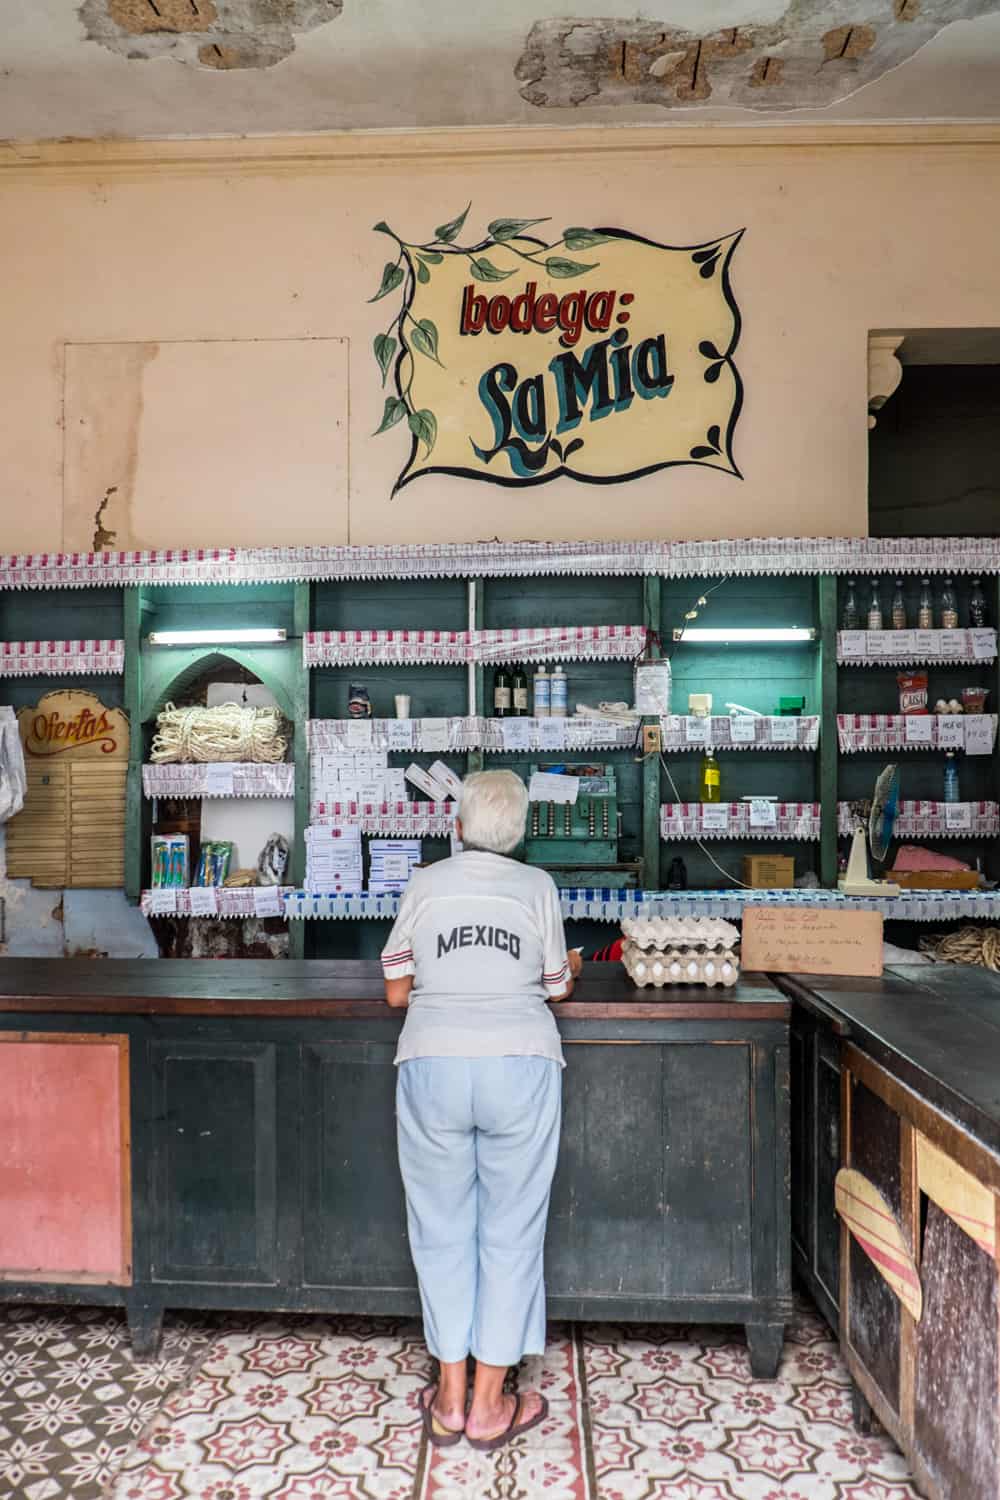 A woman in a Mexico t-shirt stands at the counter of a ration store in Cuba next to two trays of eggs.